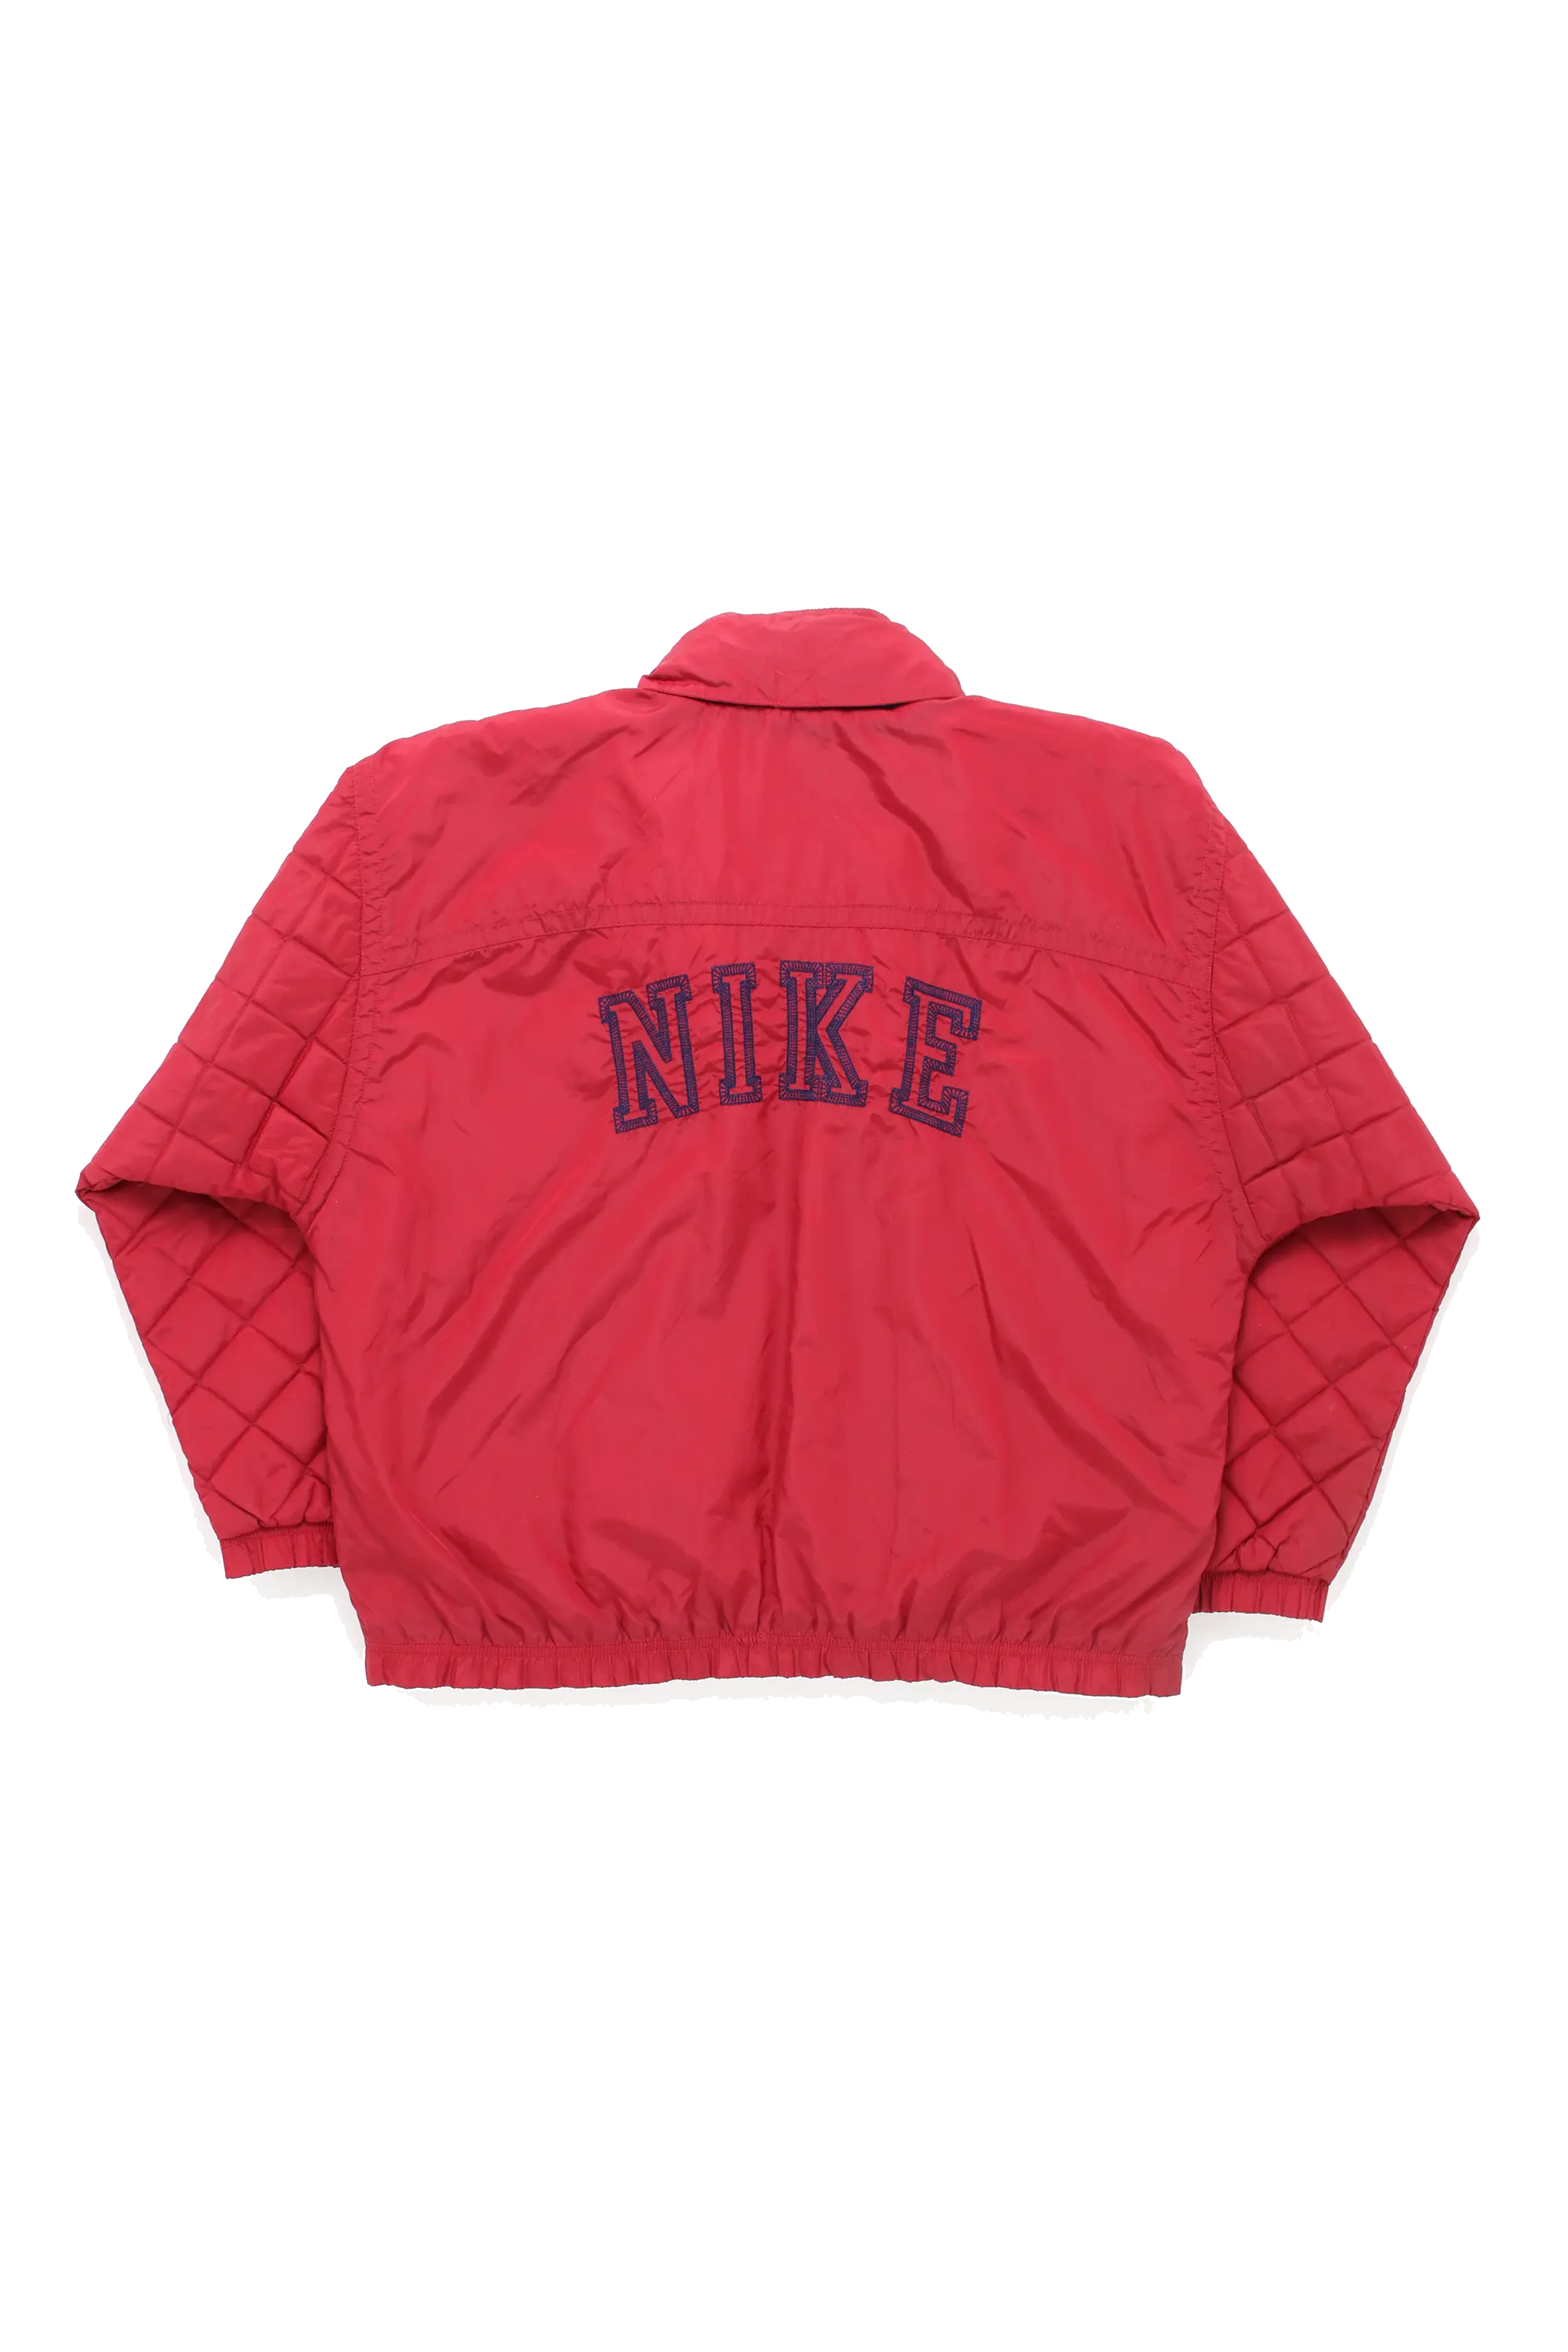 Nike Spellout Quilt Jacket